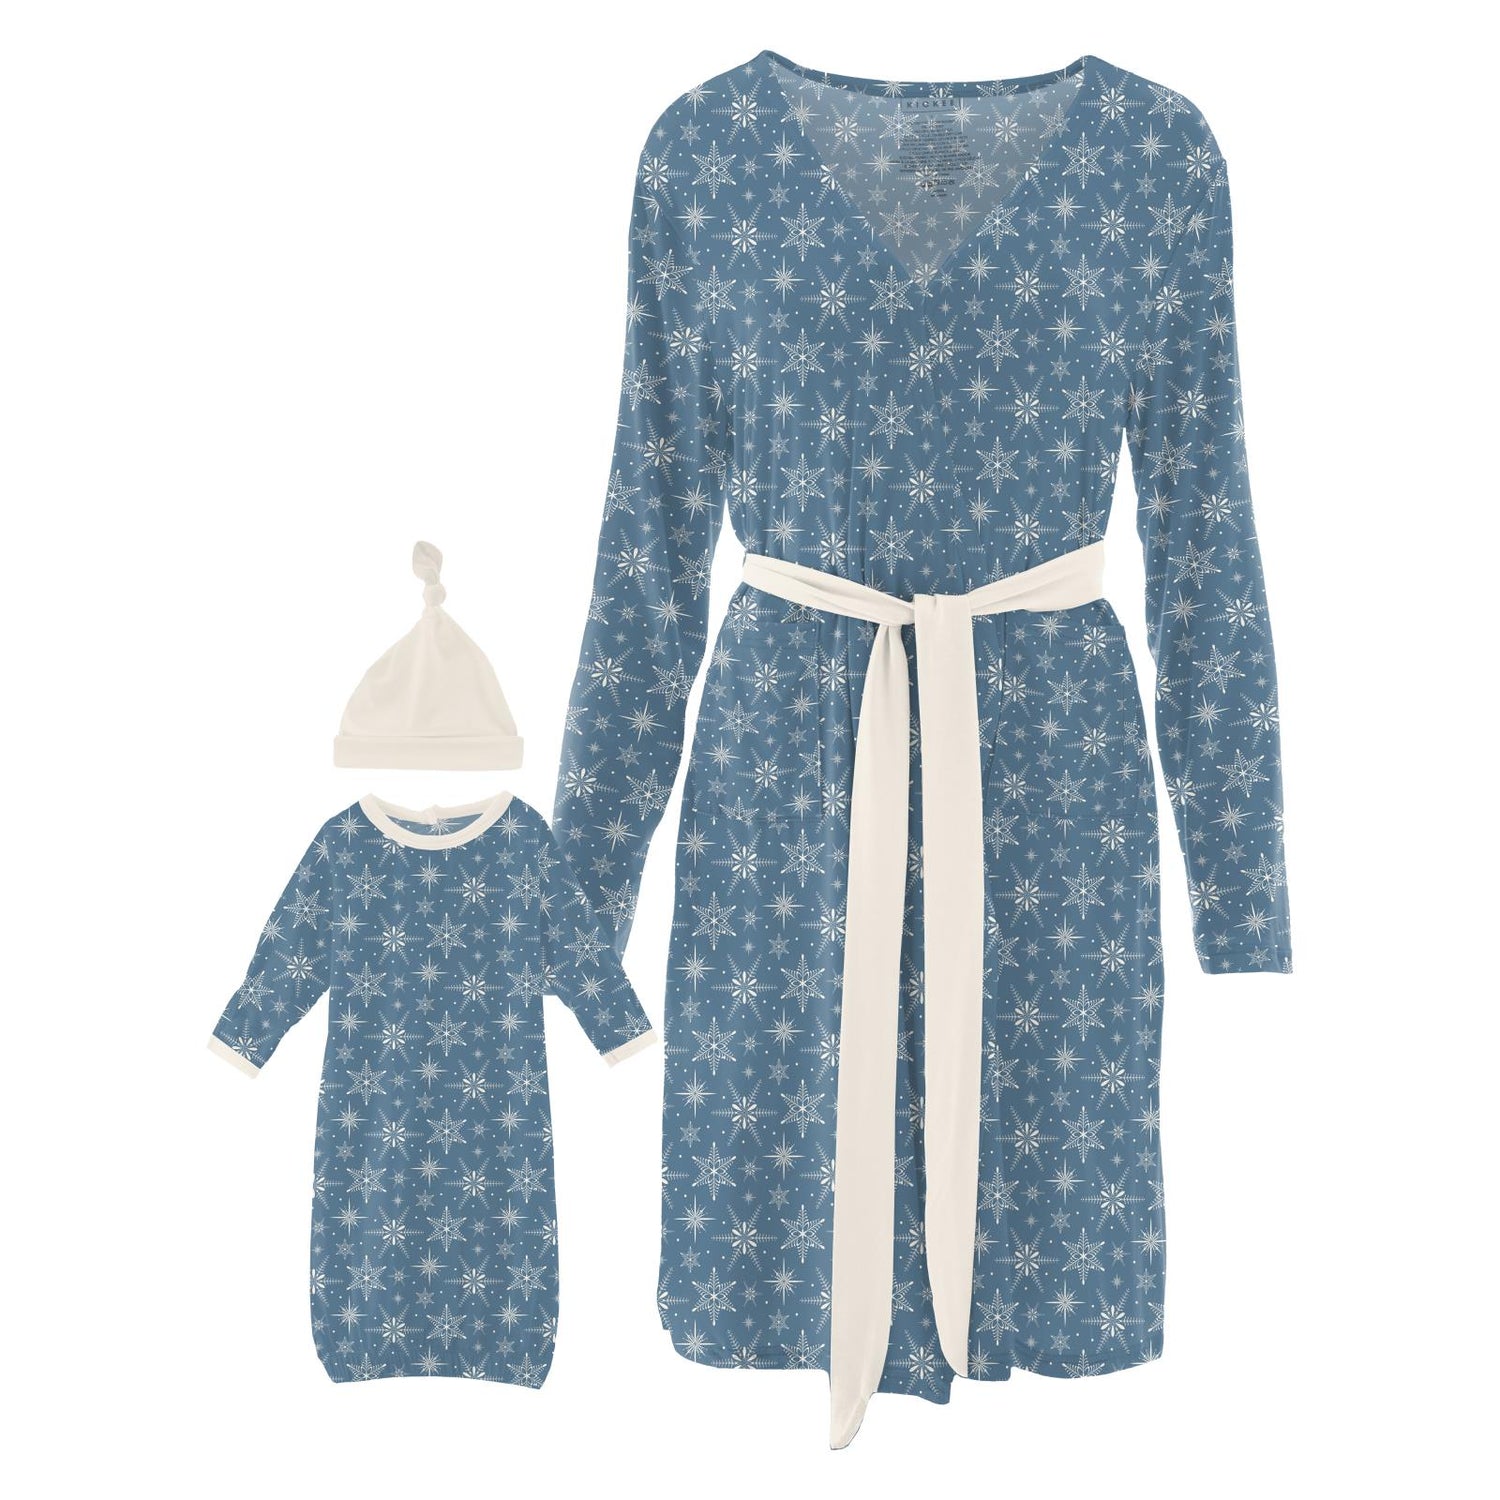 Women's Print Mid Length Lounge Robe & Layette Gown Set in Parisian Blue Snowflakes